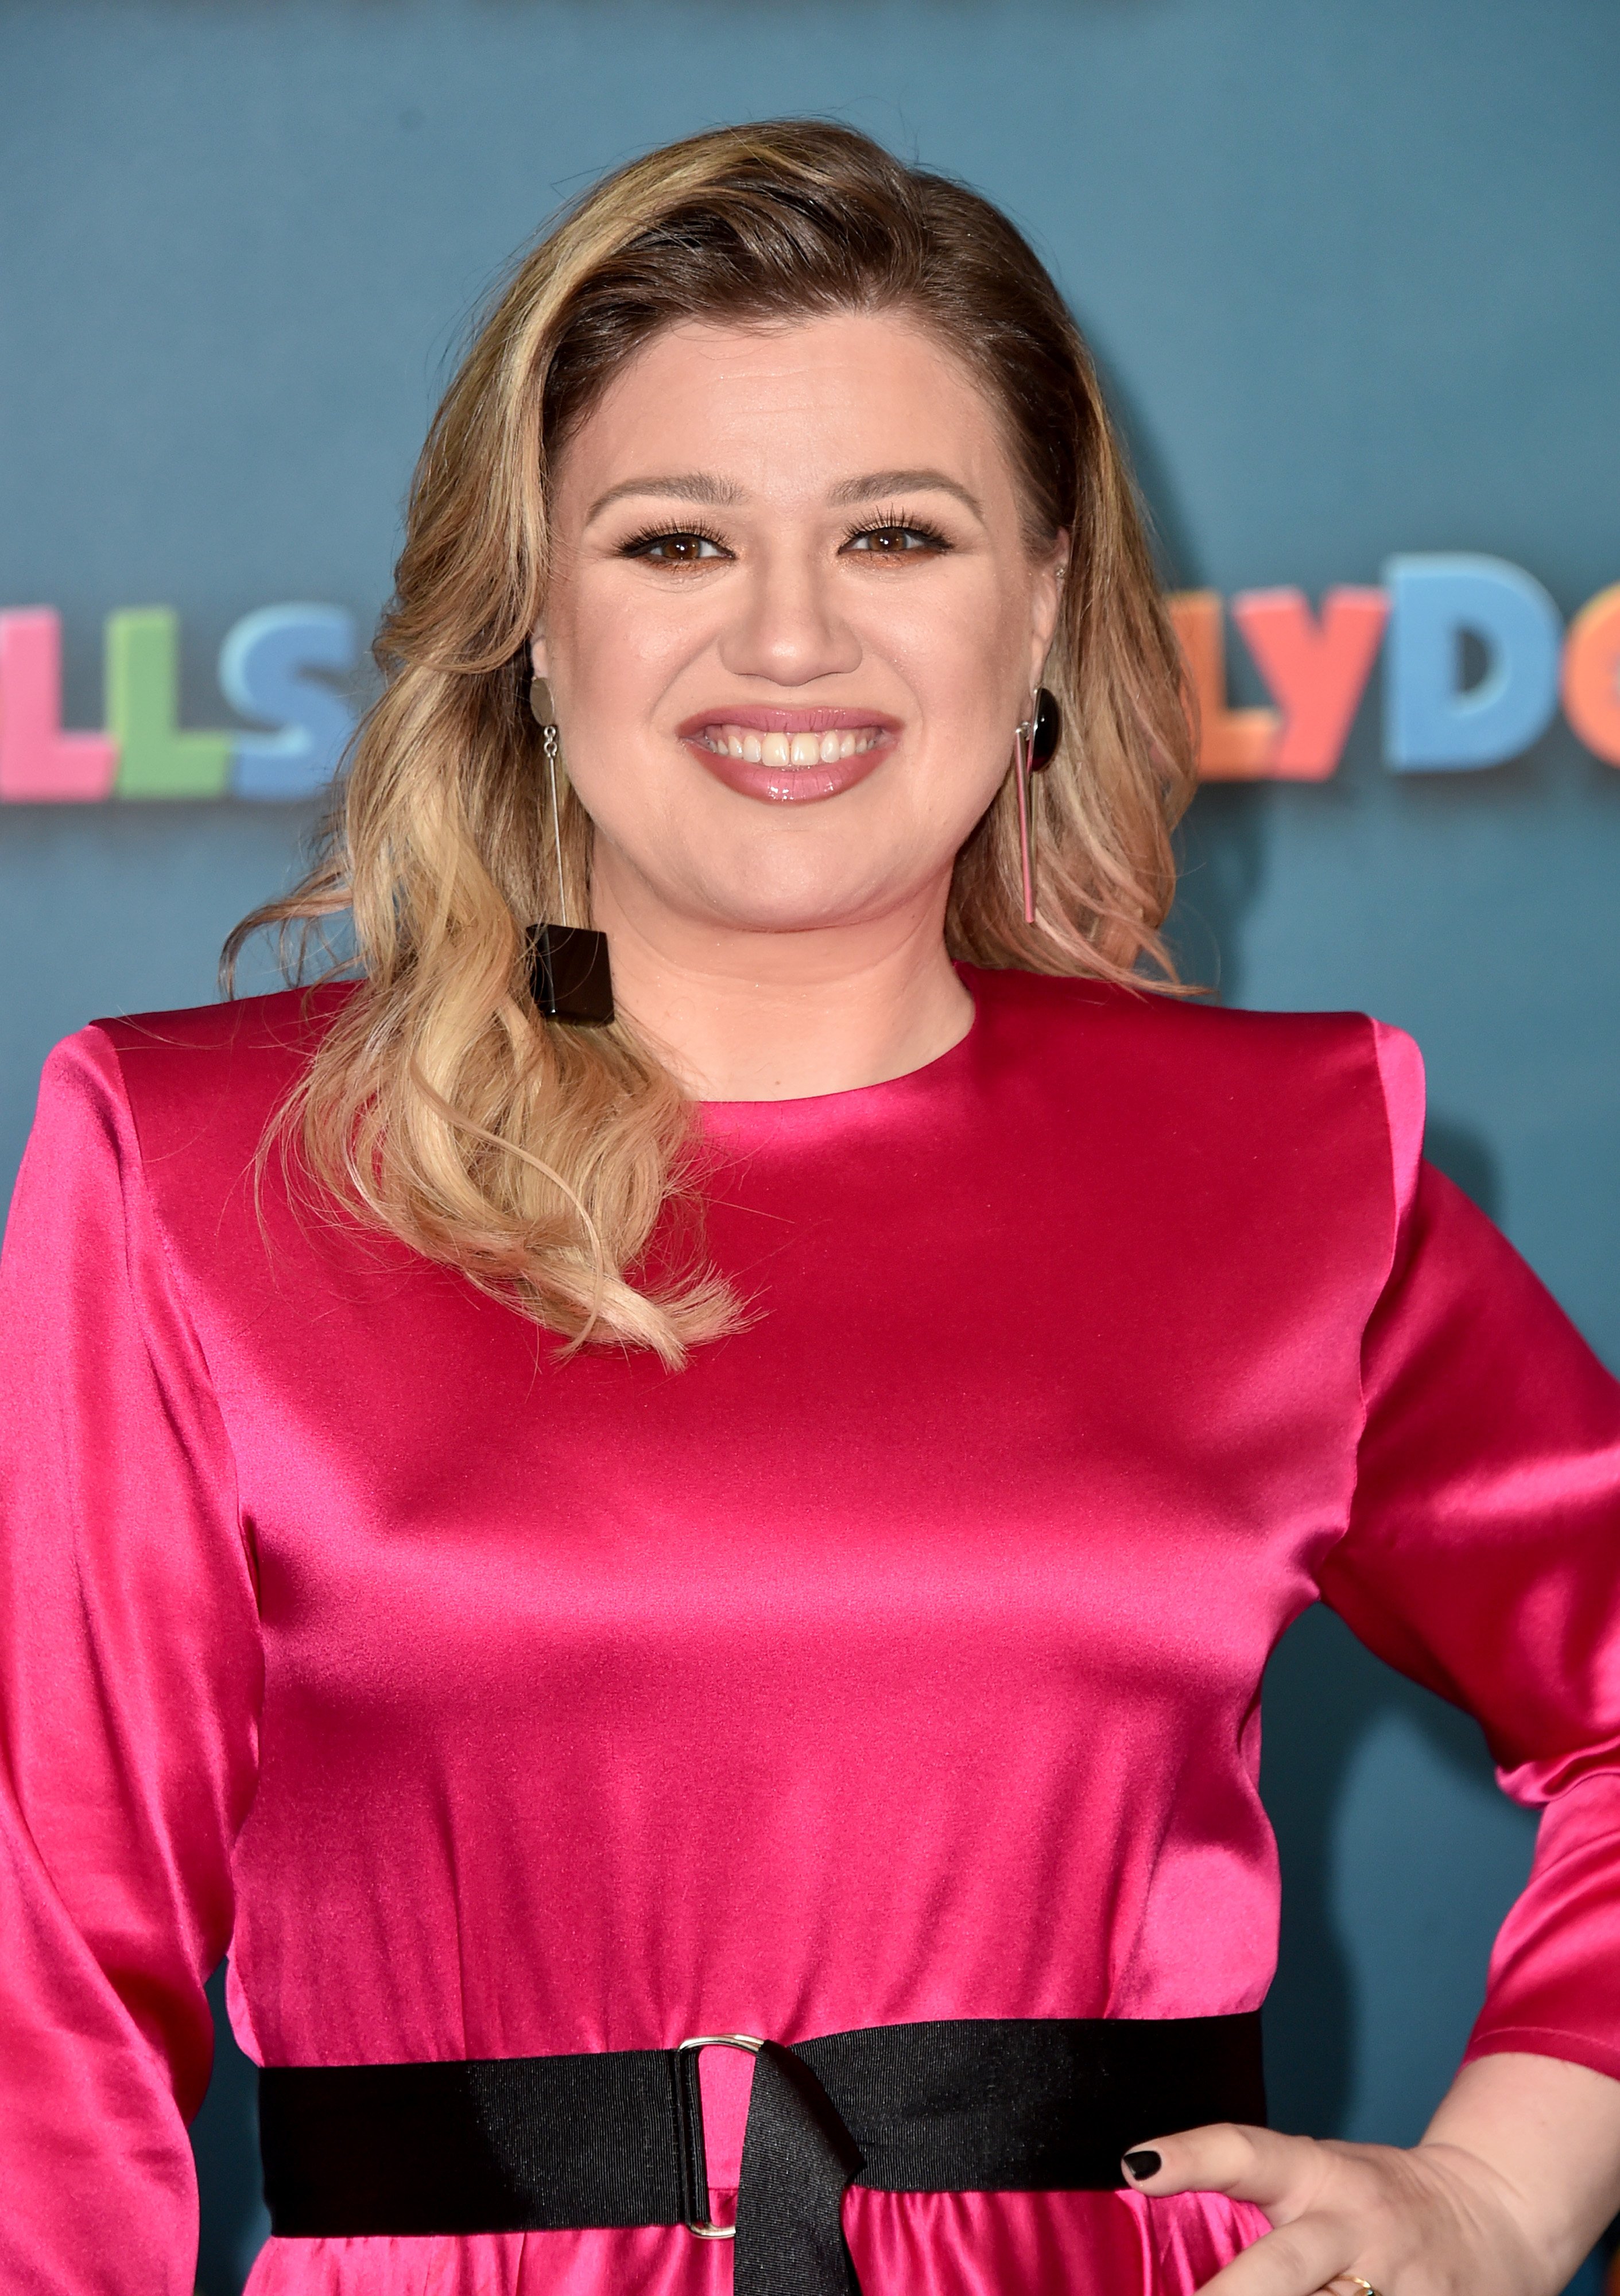 Kelly Clarkson attends "UglyDolls" photo call  on April 13, 2019, in Beverly Hills, California. | Source: Getty Images.